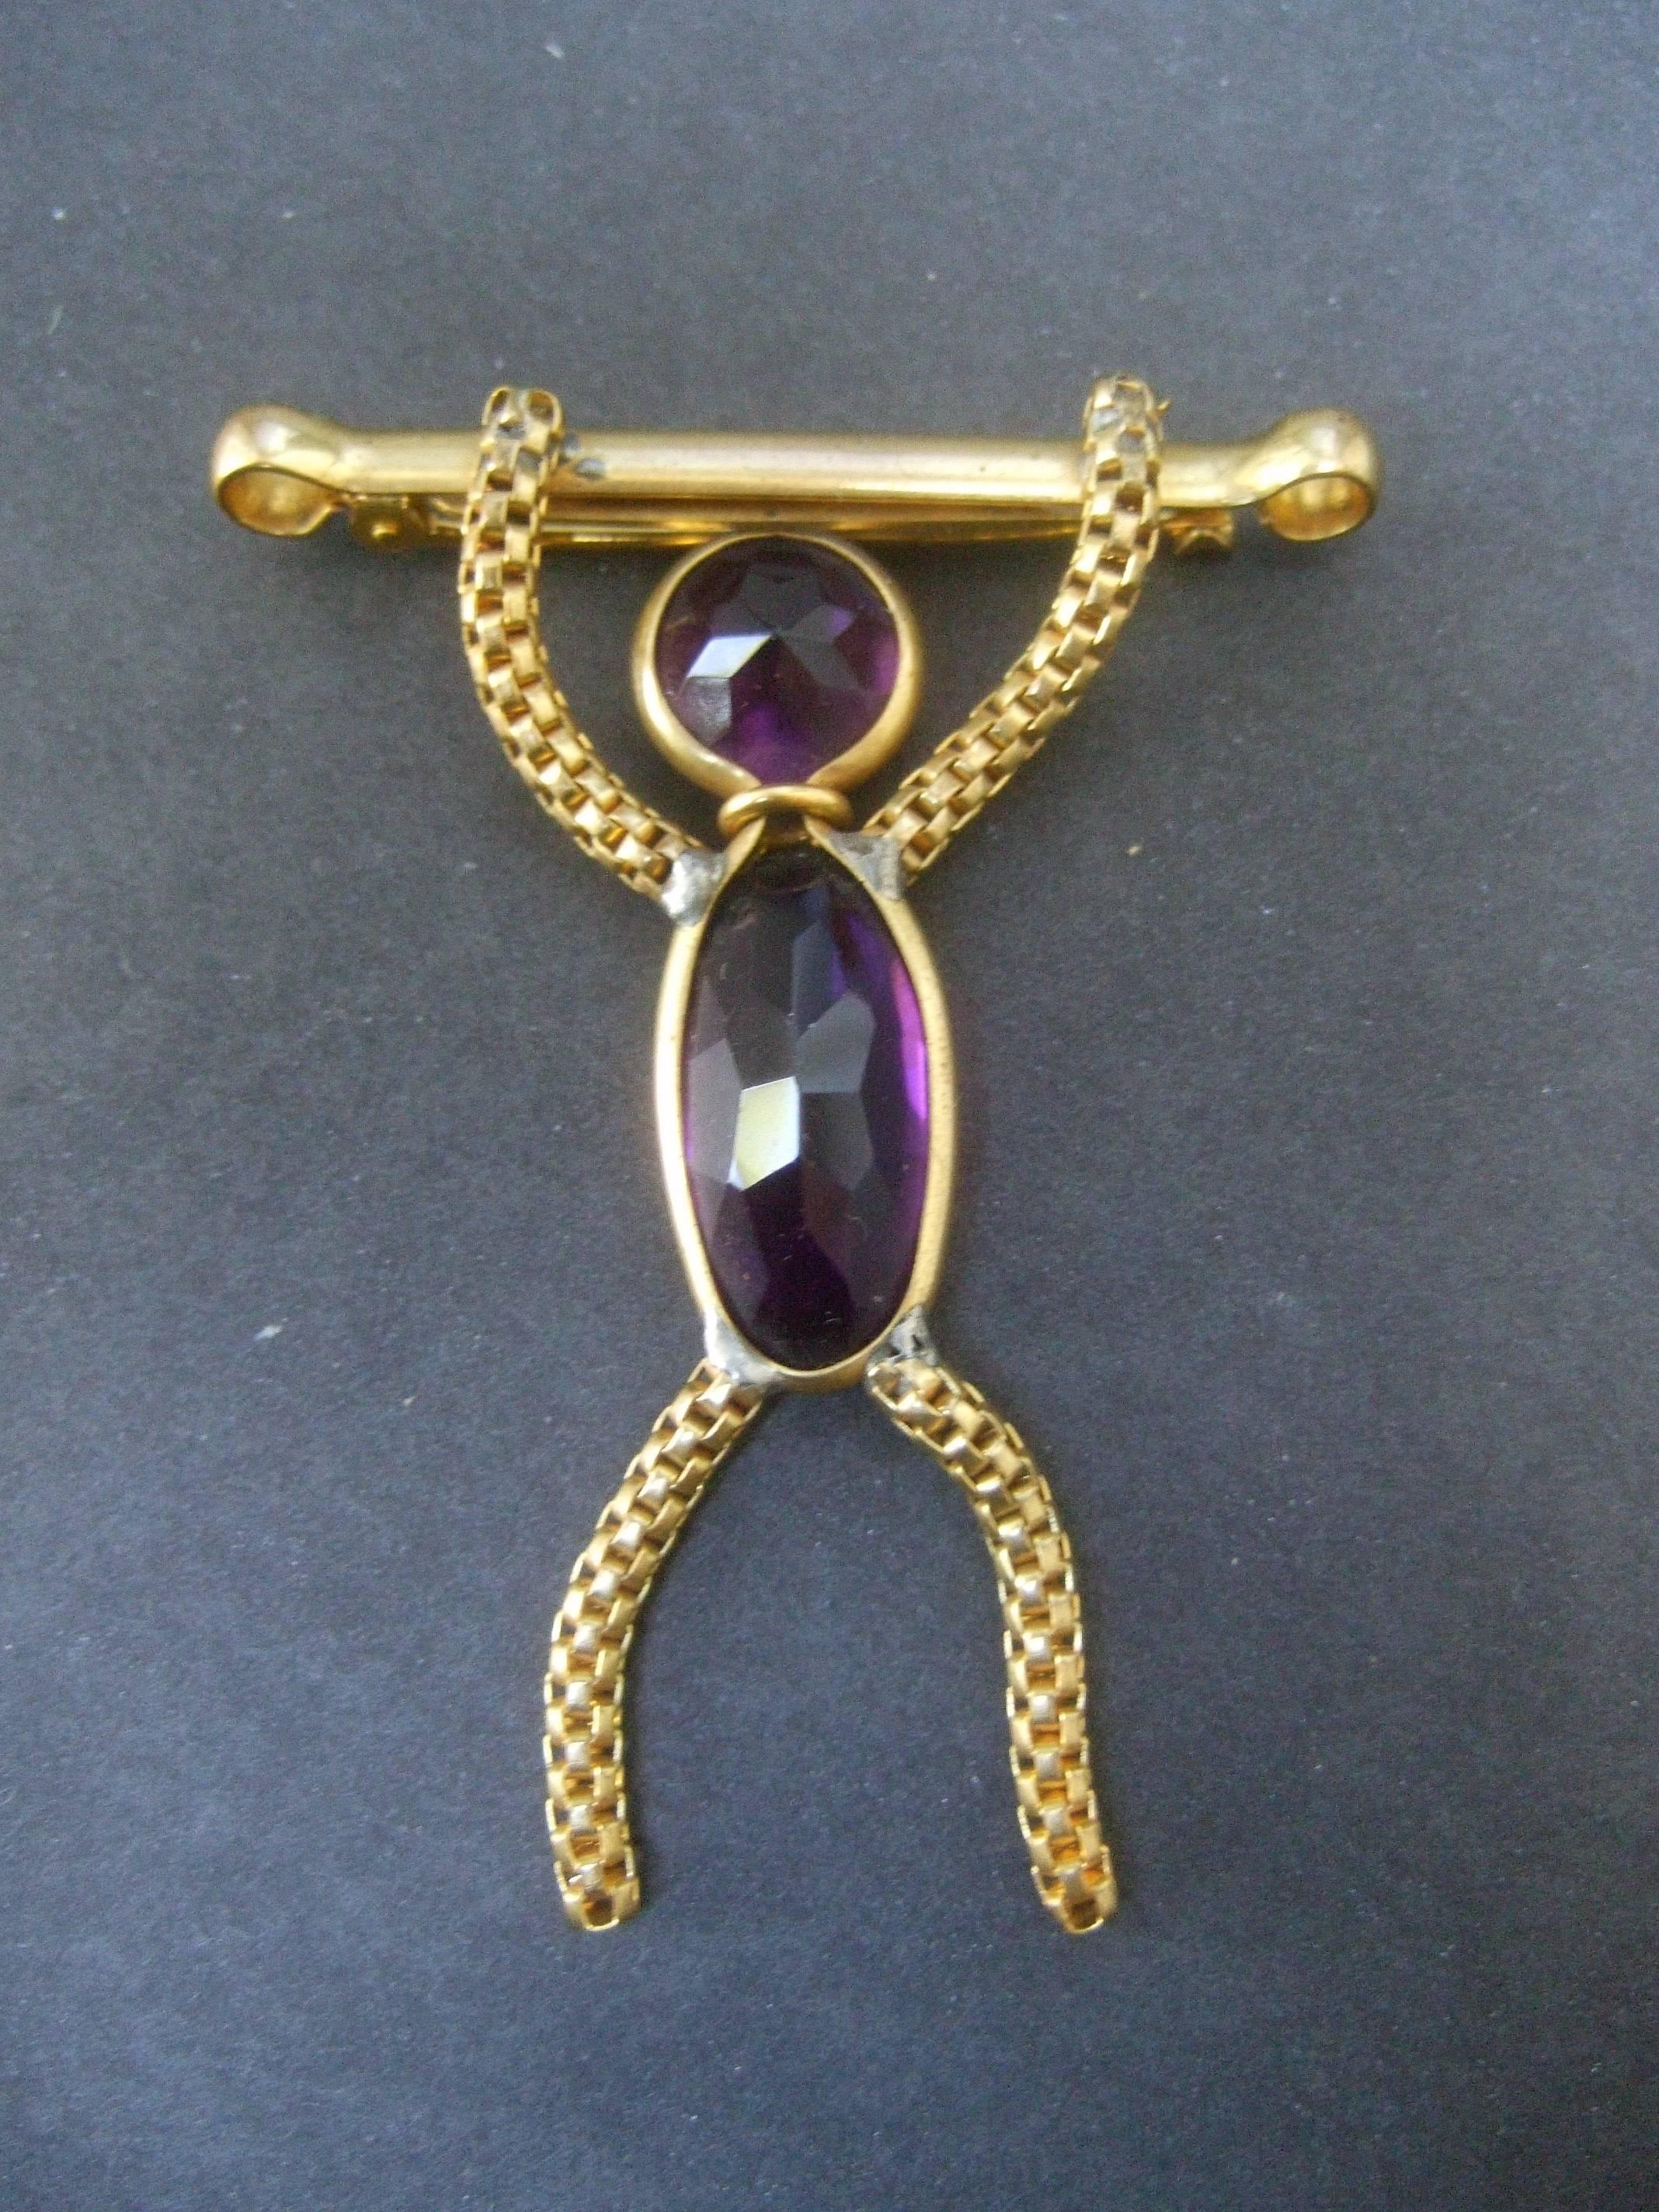 Whimsical Figural Hang Man Crystal Brooch circa 1960 In Good Condition For Sale In University City, MO